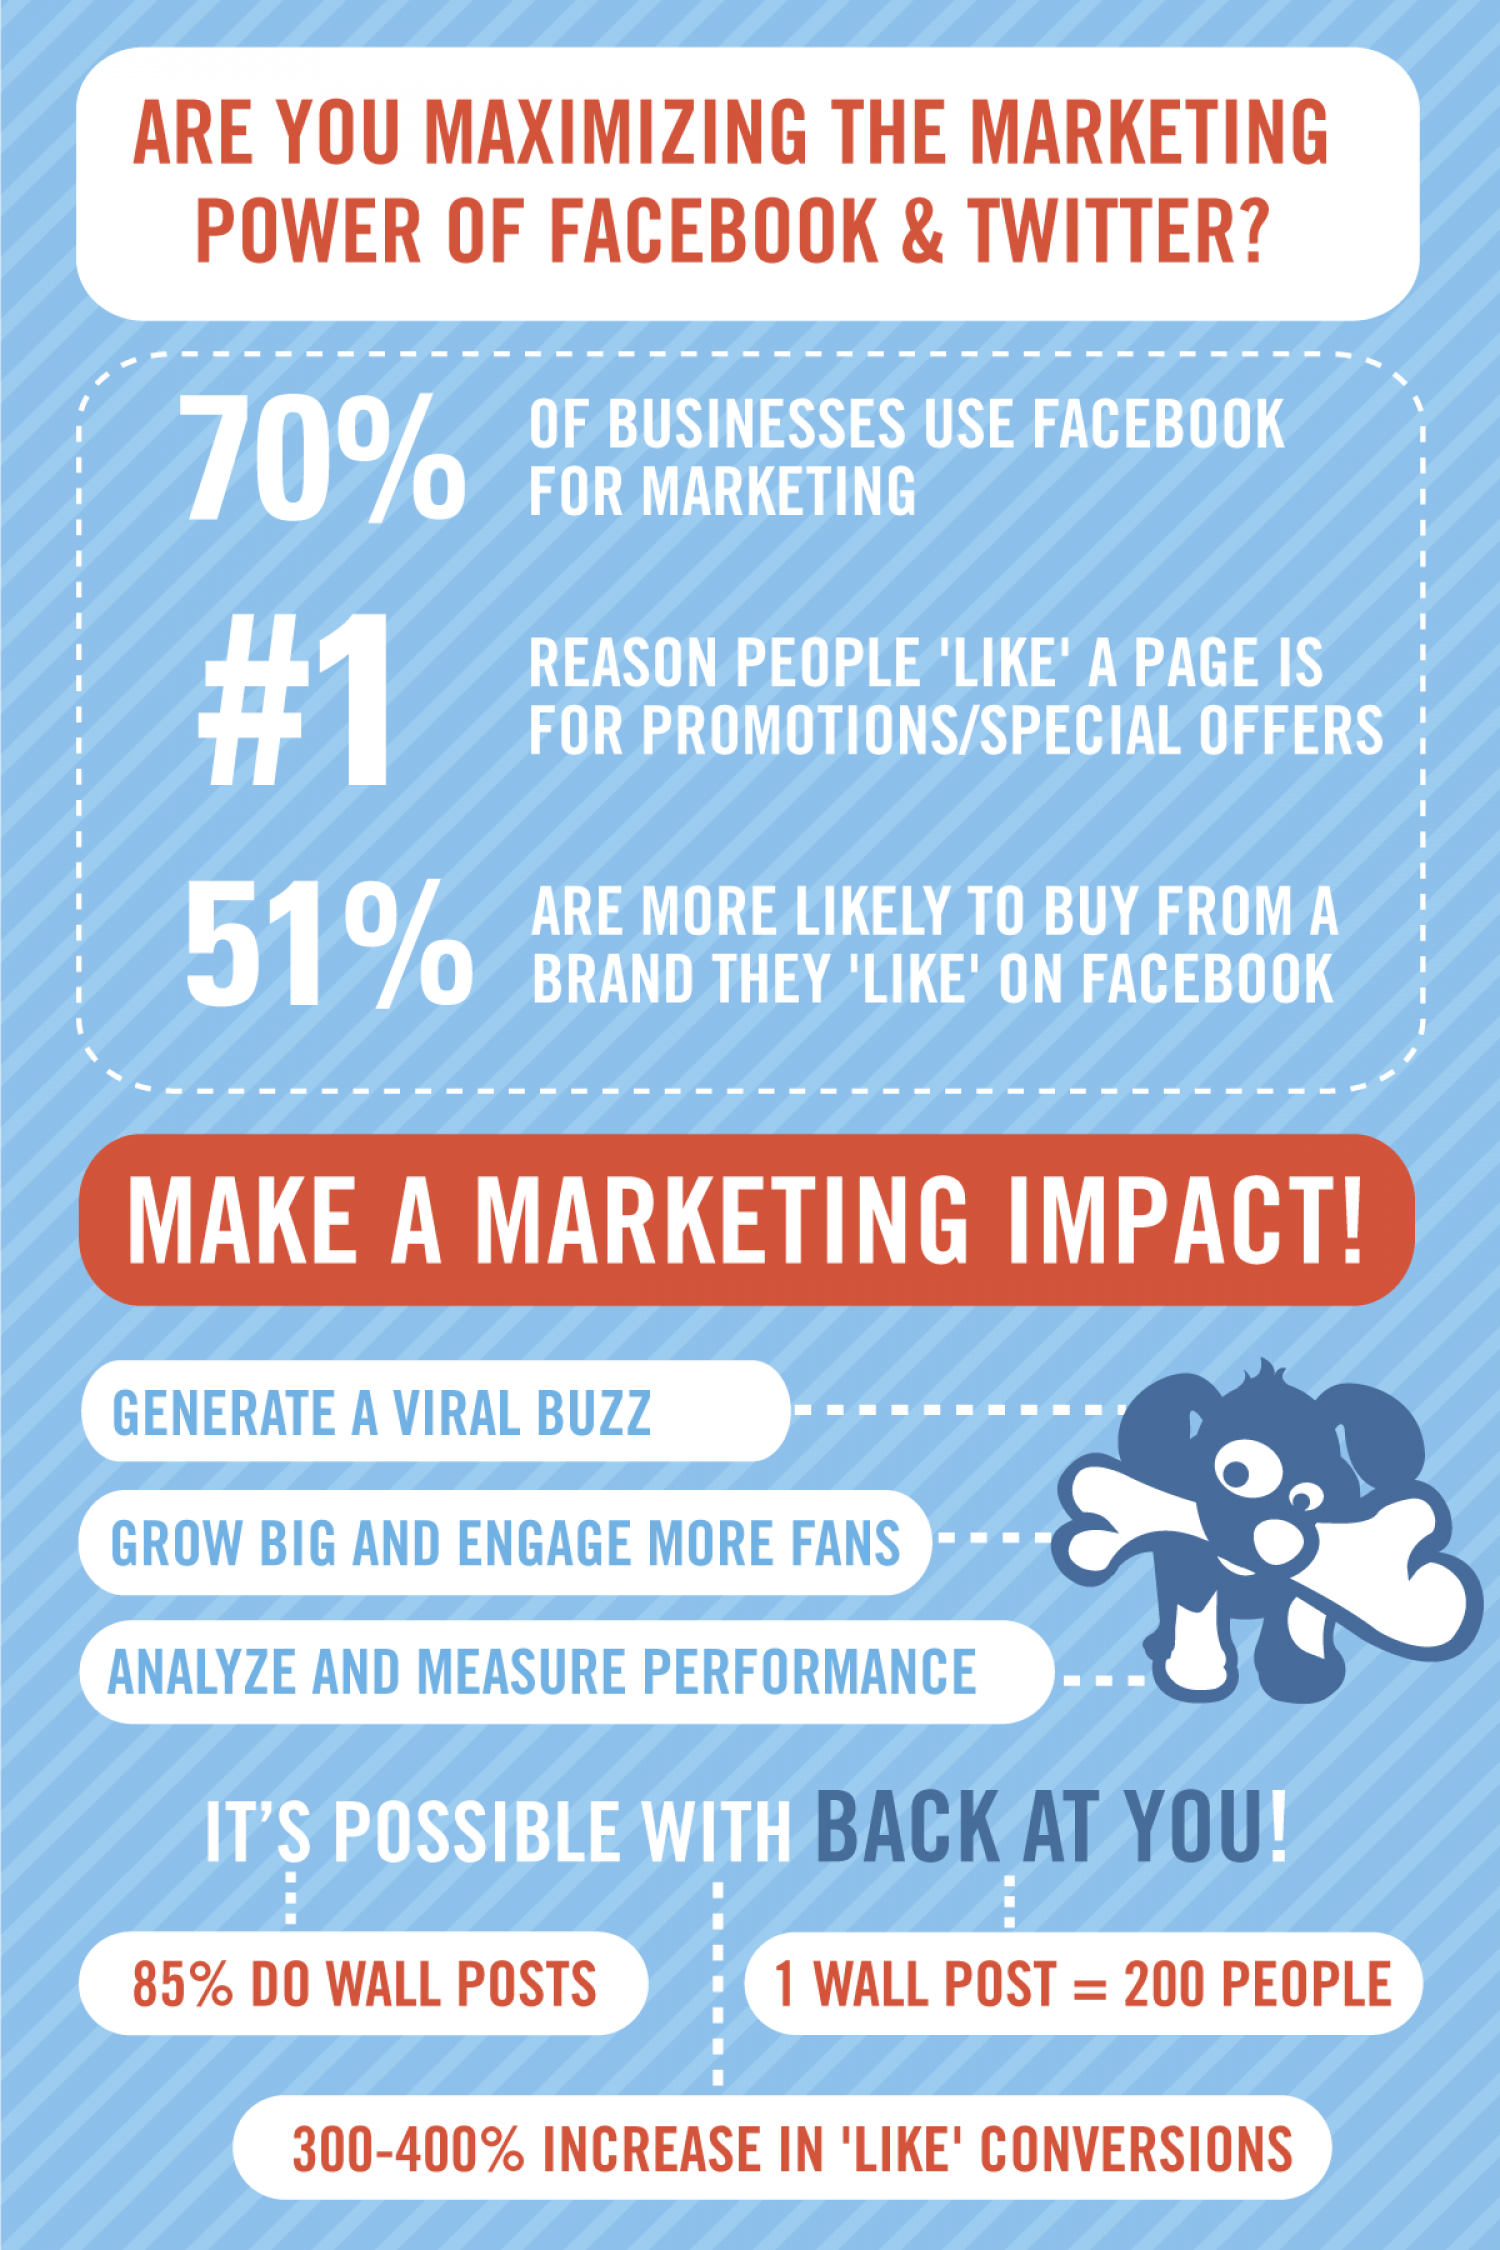 Maximizing The Marketing Power of Facebook and Twitter Infographic